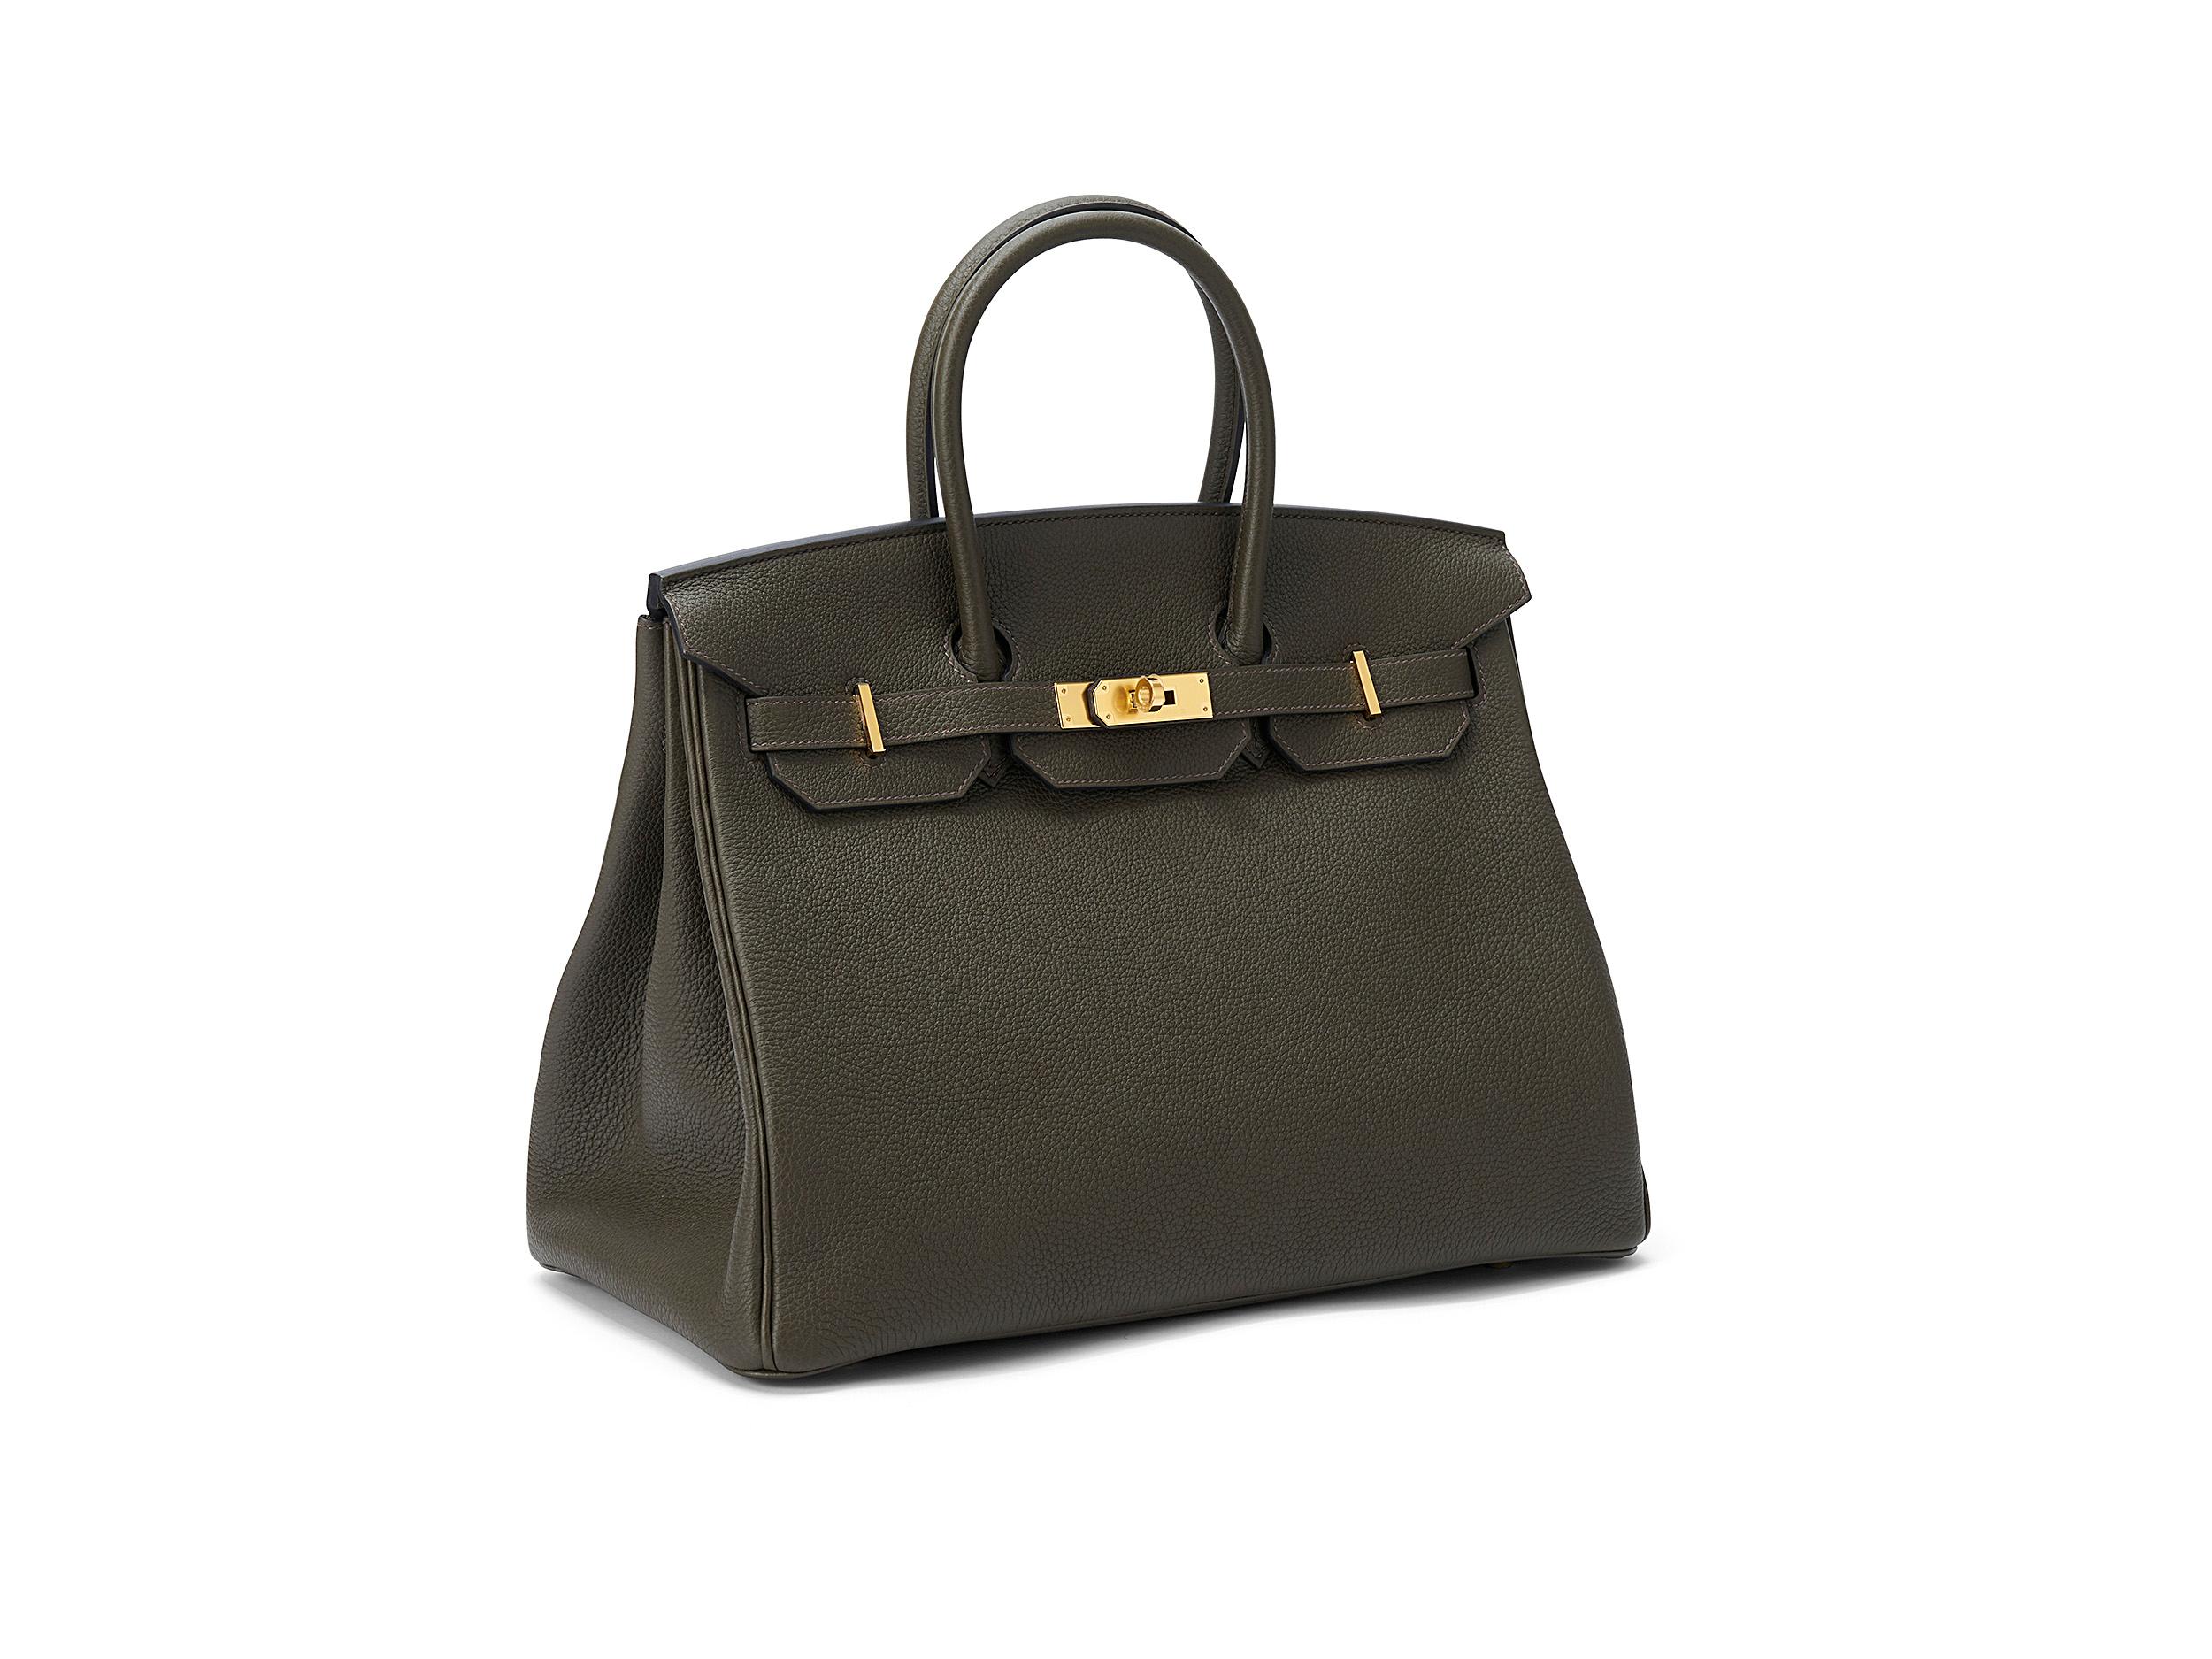 Hermès Birkin 35 in vert de gris and togo leather with gold hardware. The bag is unworn and comes as full set including the original receipt.  Stamp Y (2020) 

